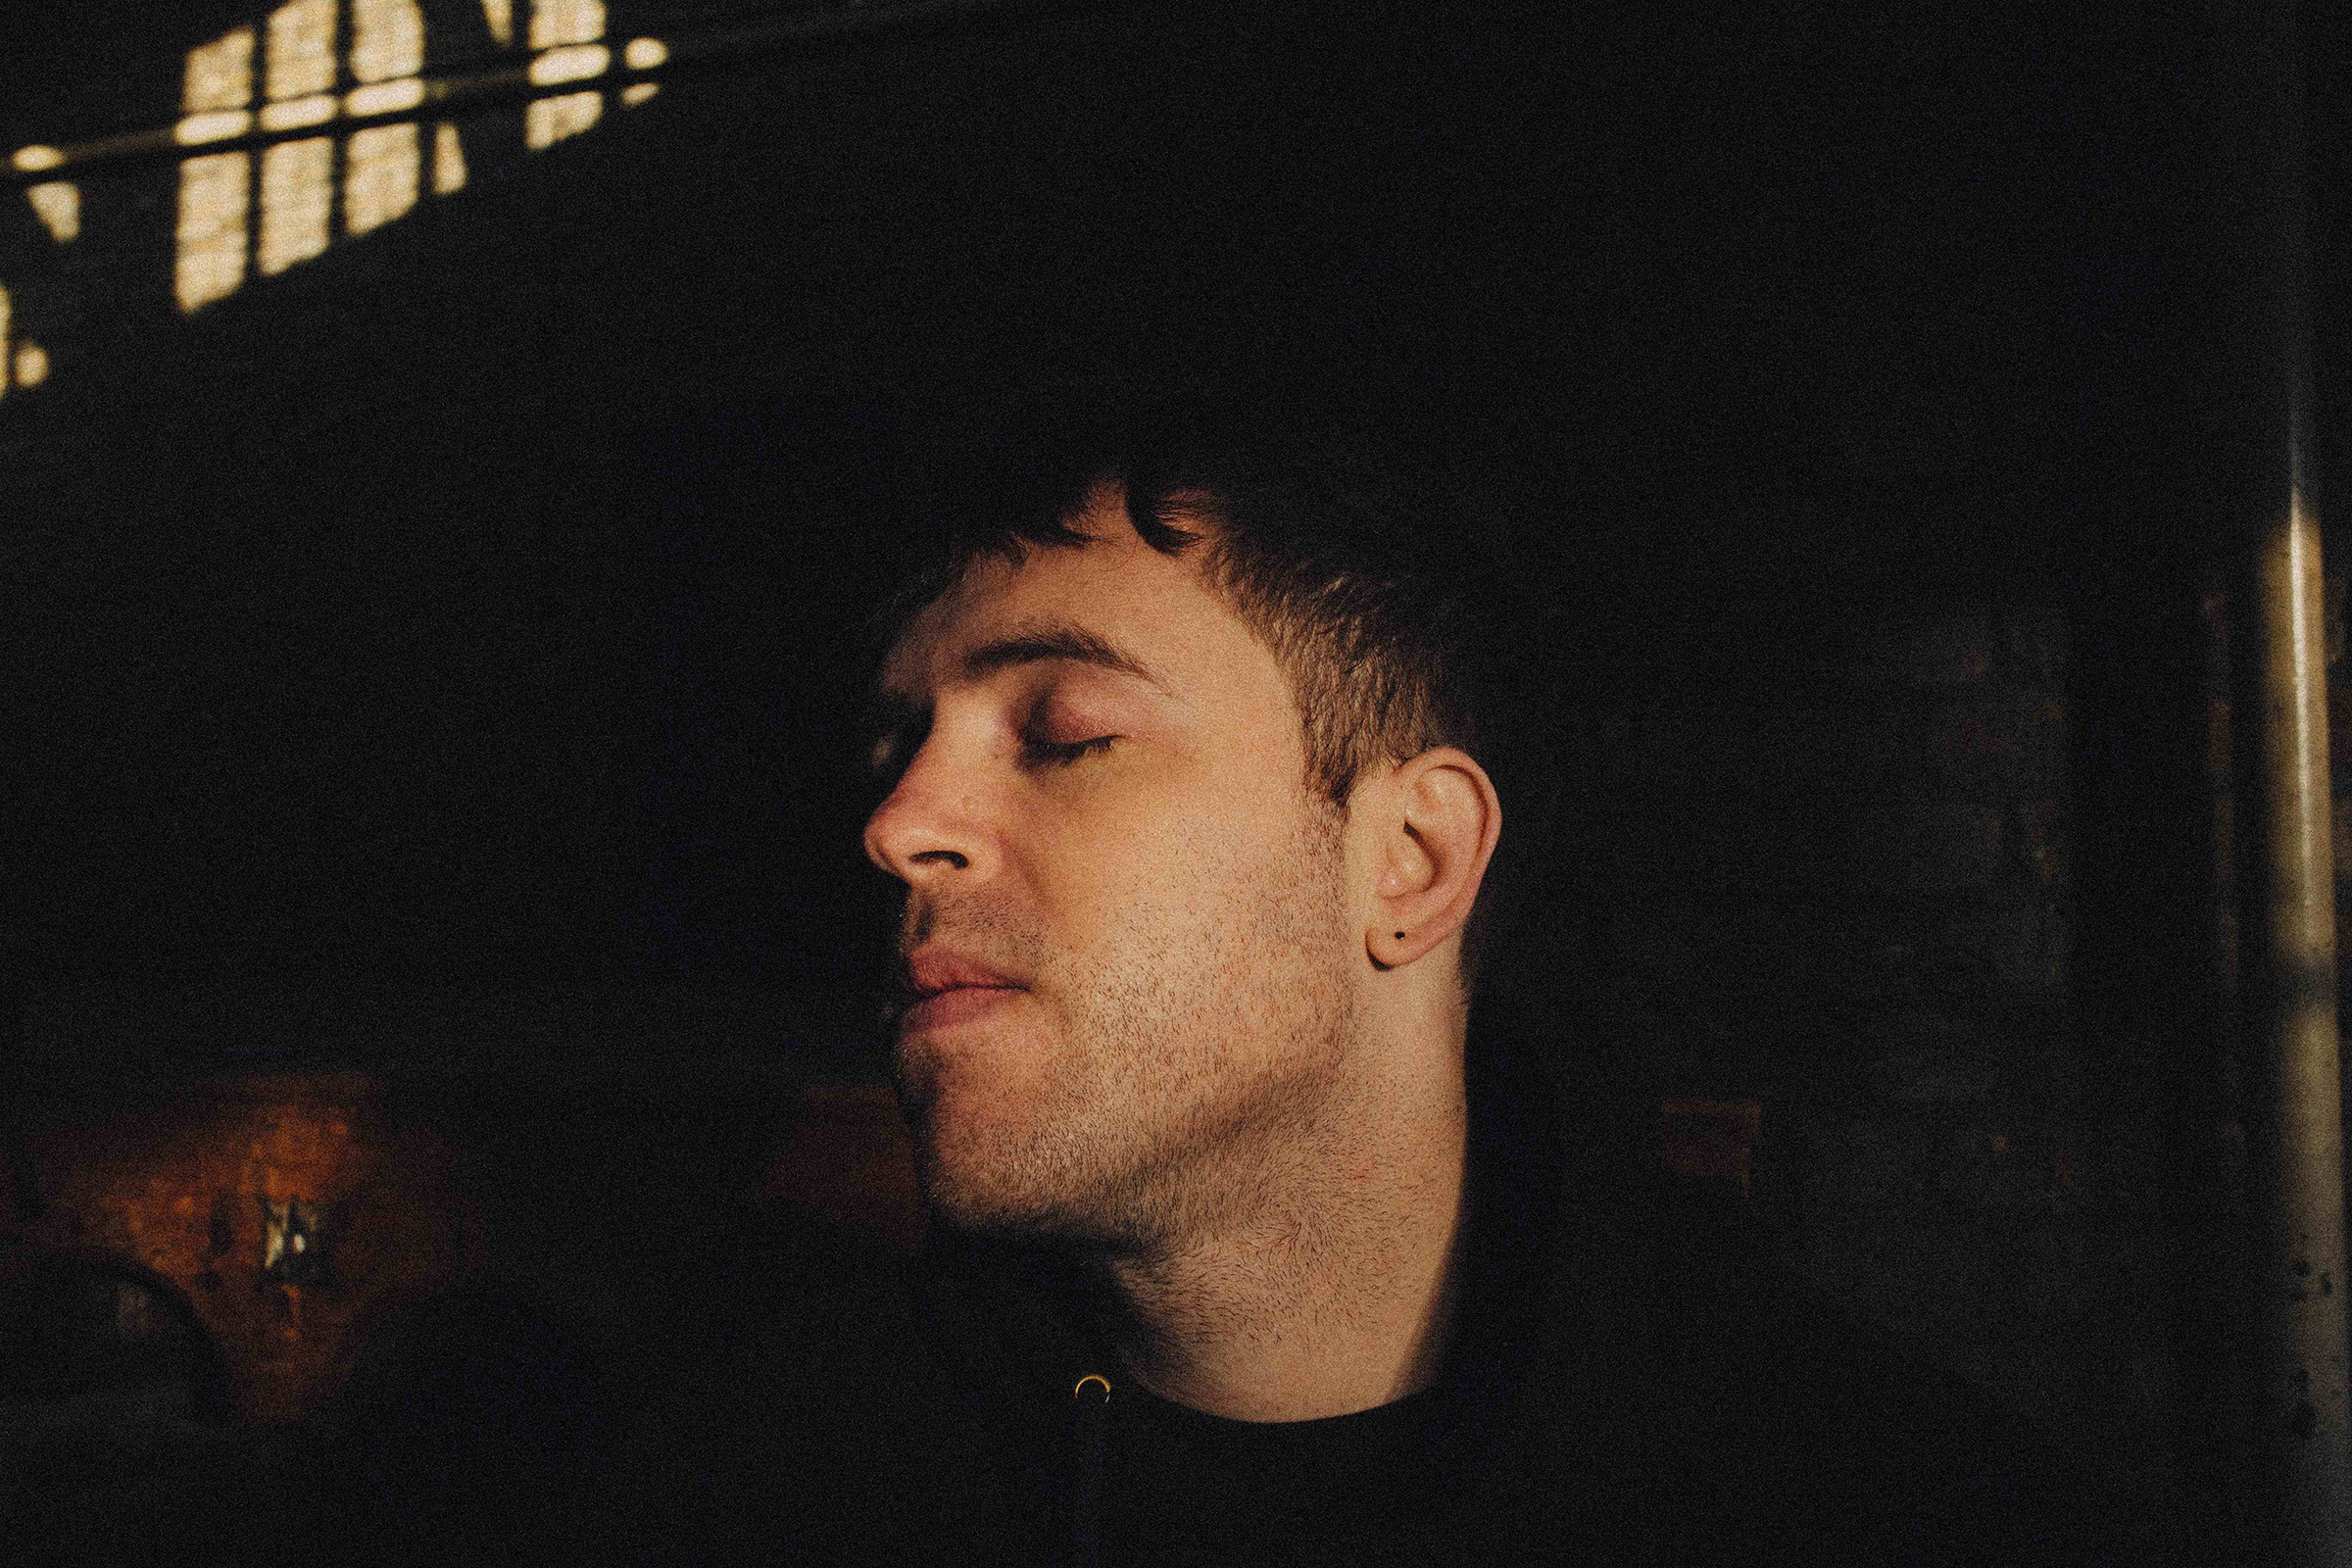 BENJAMIN FRANCIS LEFTWICH releases ‘Oh My God Please’ from his forthcoming album ‘To Carry A Whale’ - out June 18th 